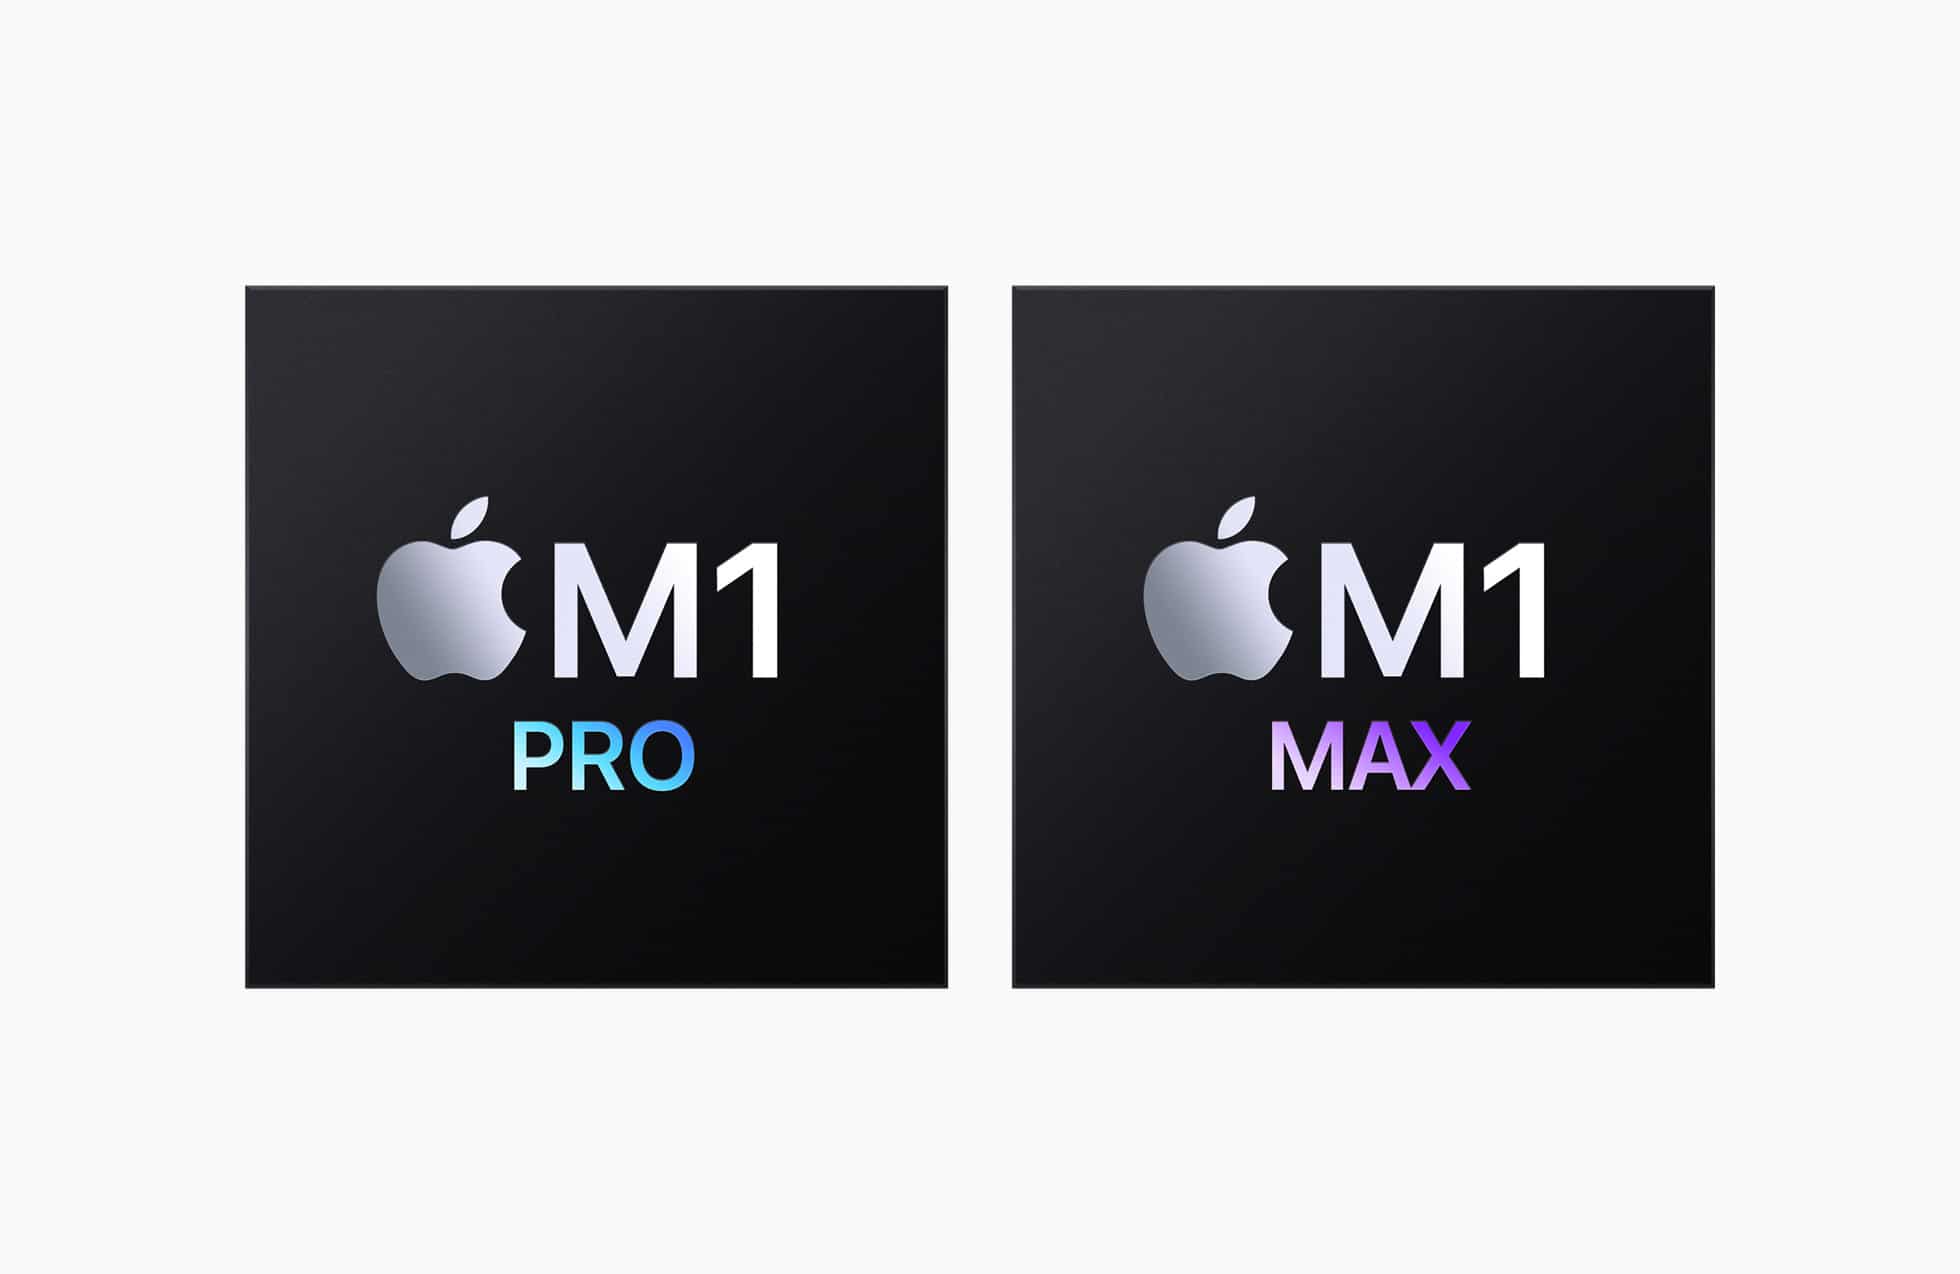 M1 Pro and M1 Max chips